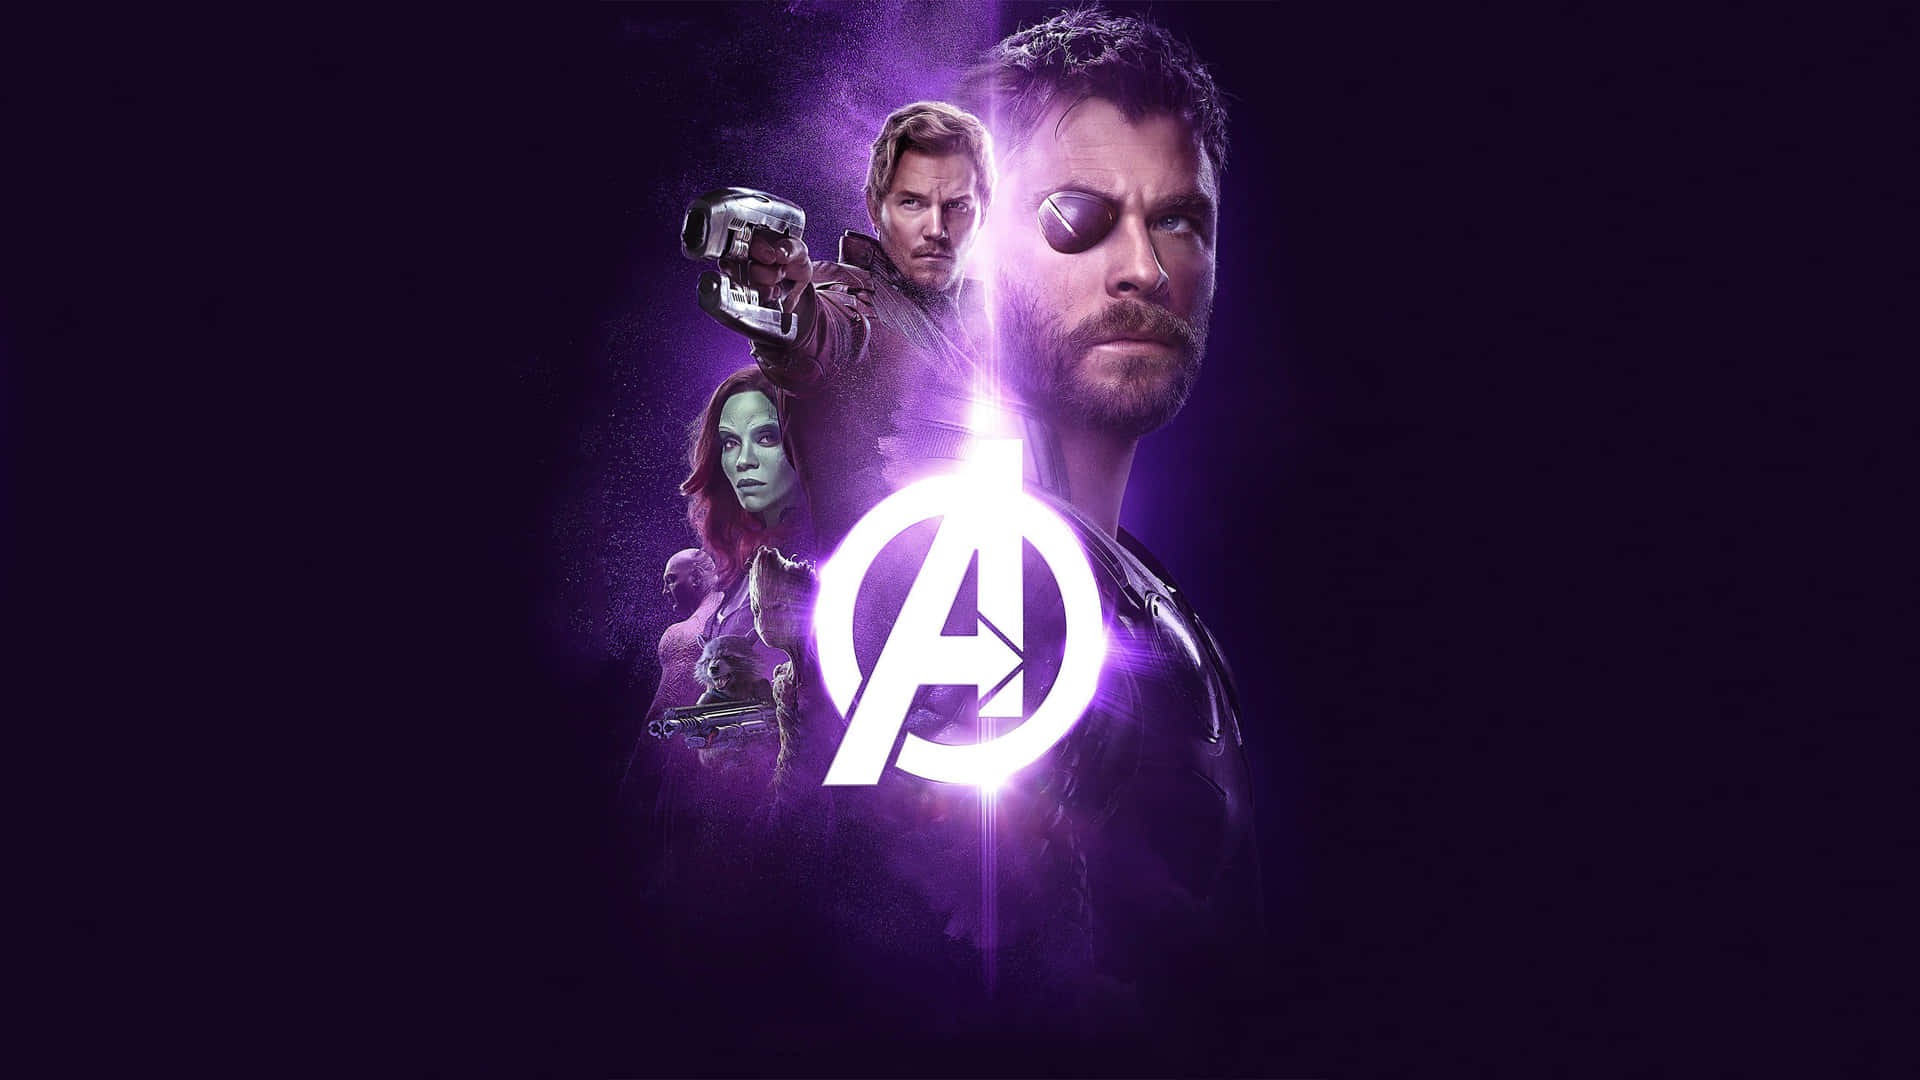 Together in the fight against evil - Avengers: Infinity War Wallpaper